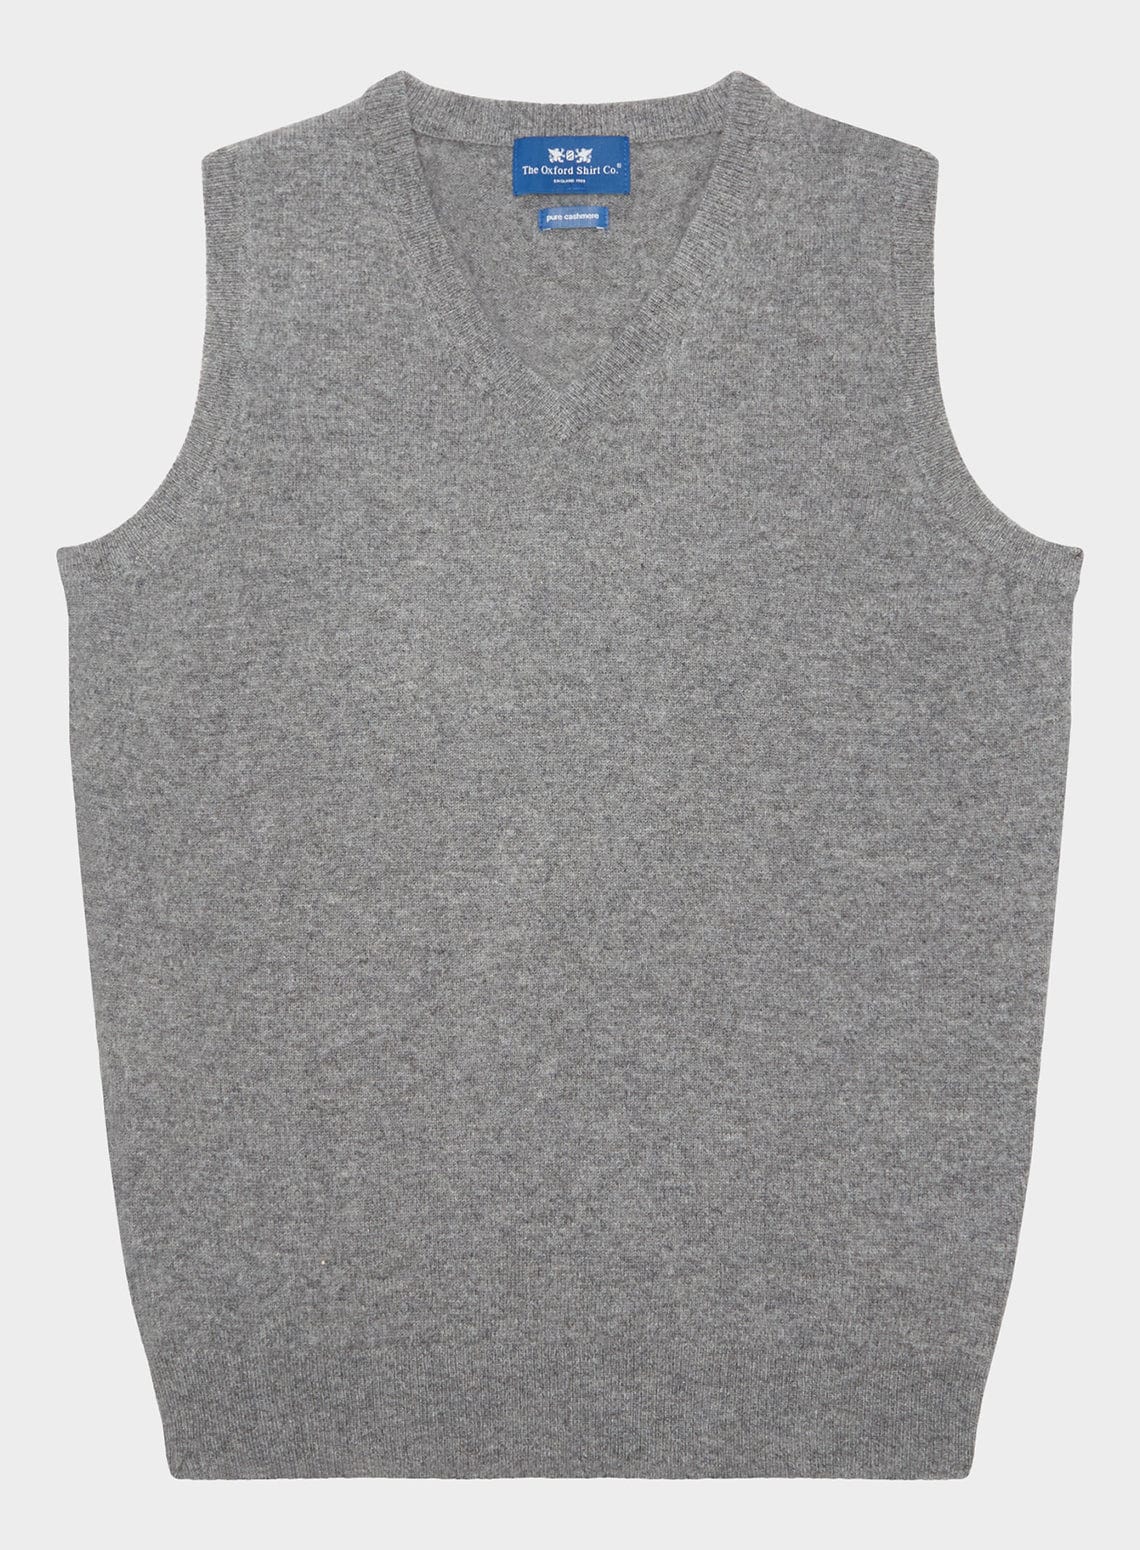 Cashmere Sleeveless in Mid Grey